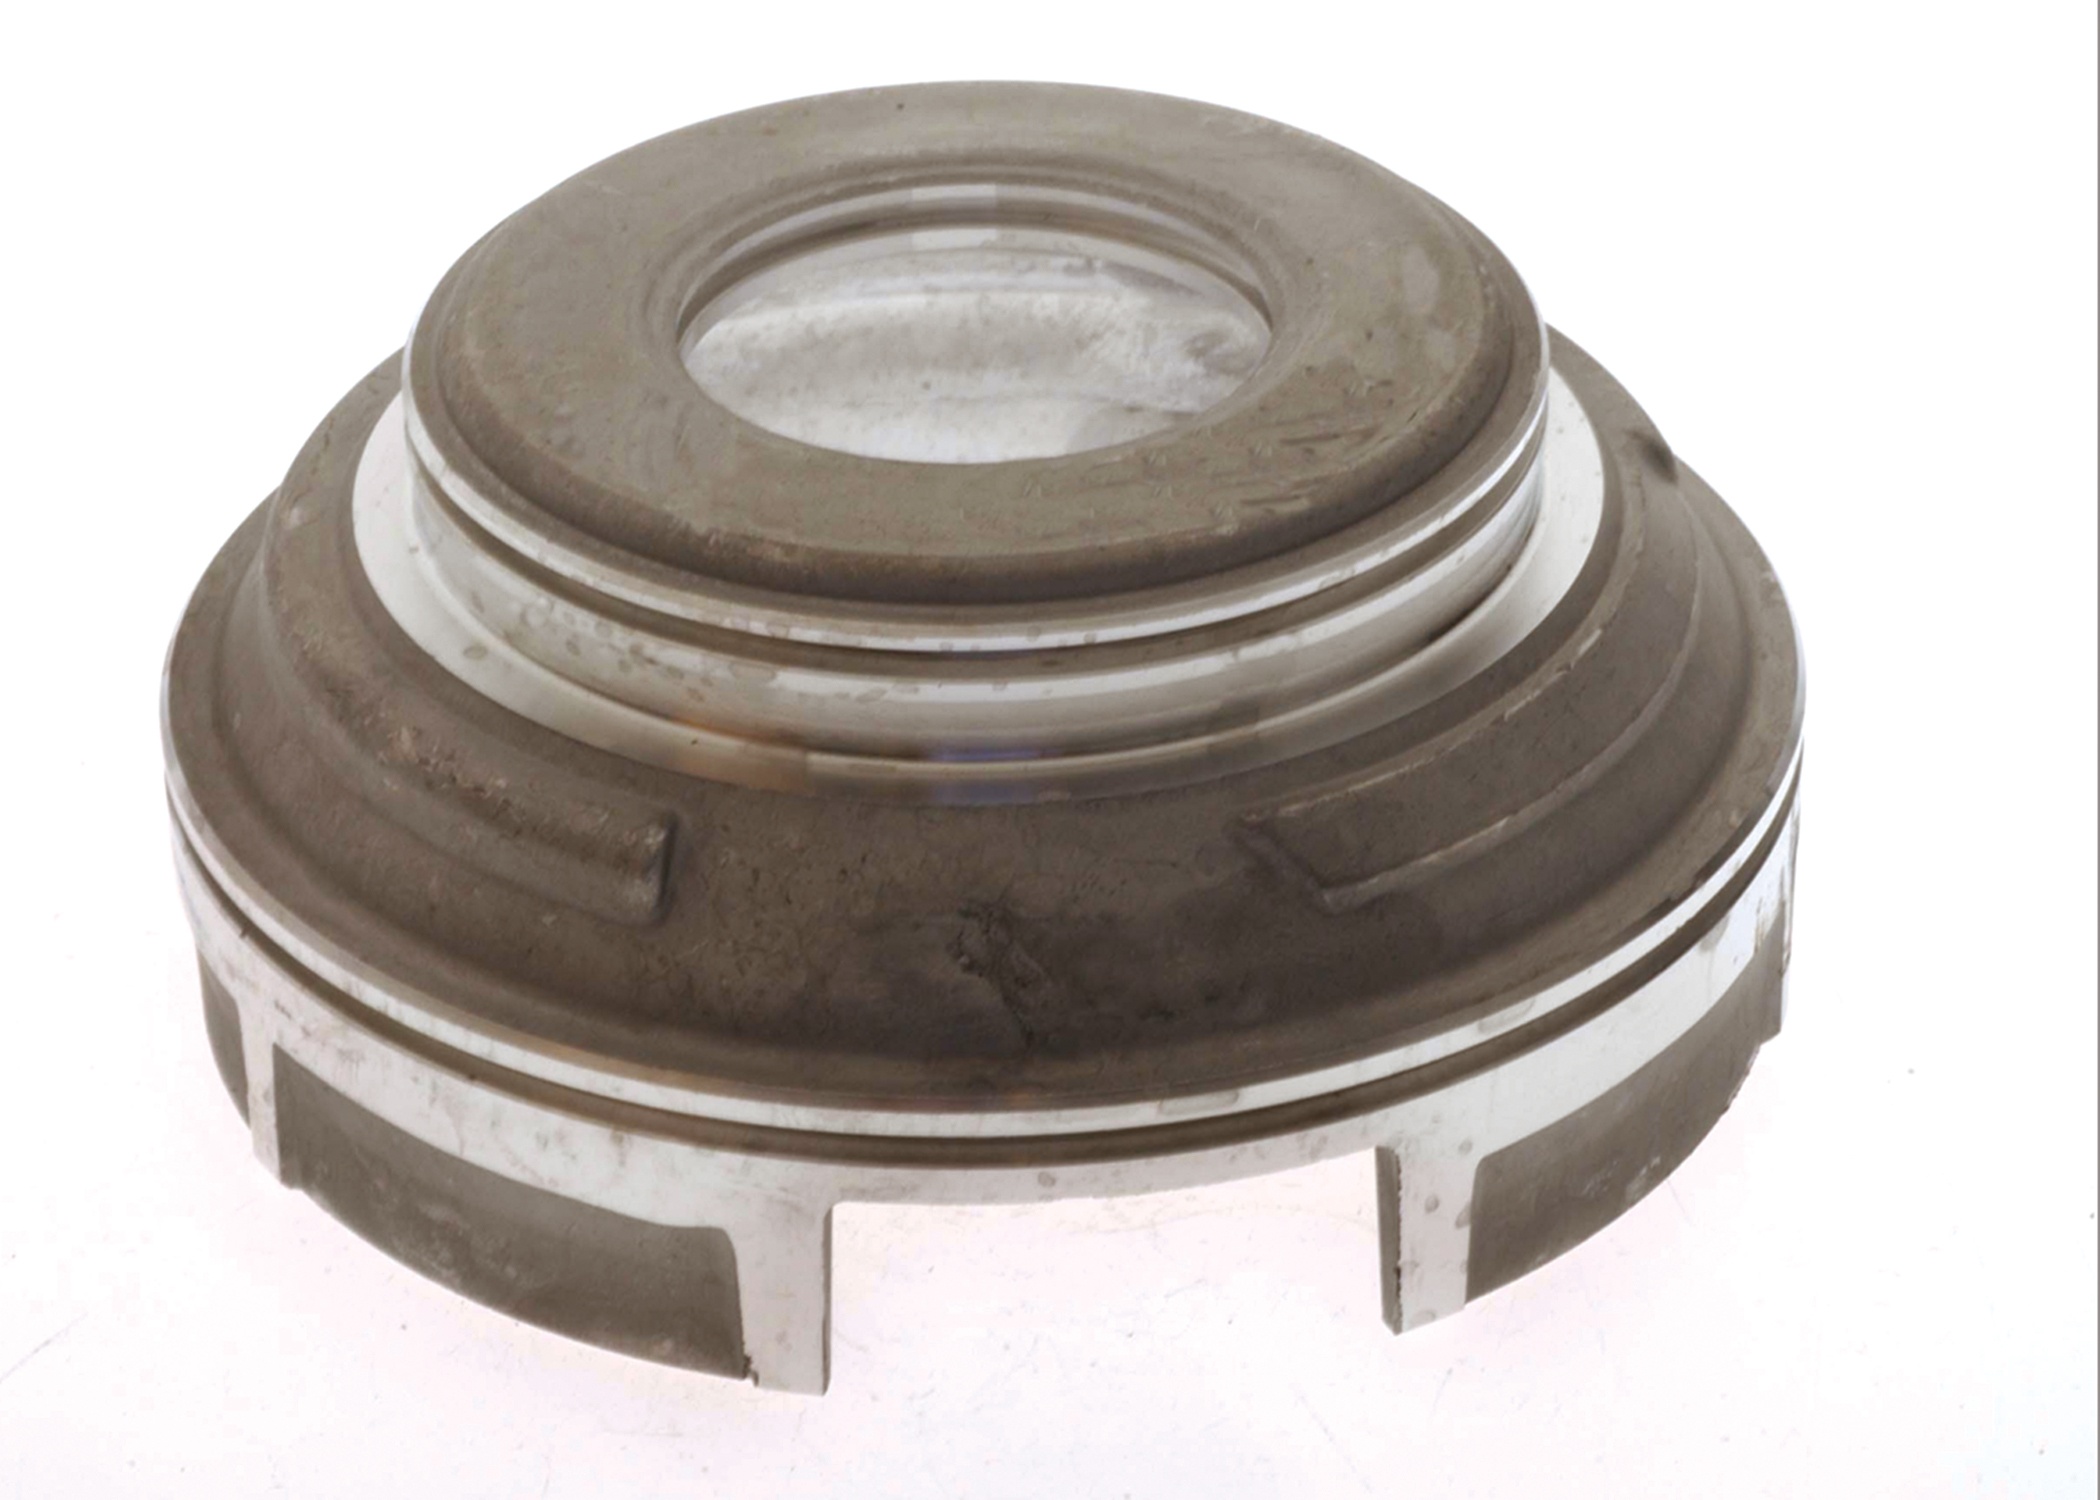 GM GENUINE PARTS - Automatic Transmission Clutch Pack Piston (Low / Reverse) - GMP 8685549